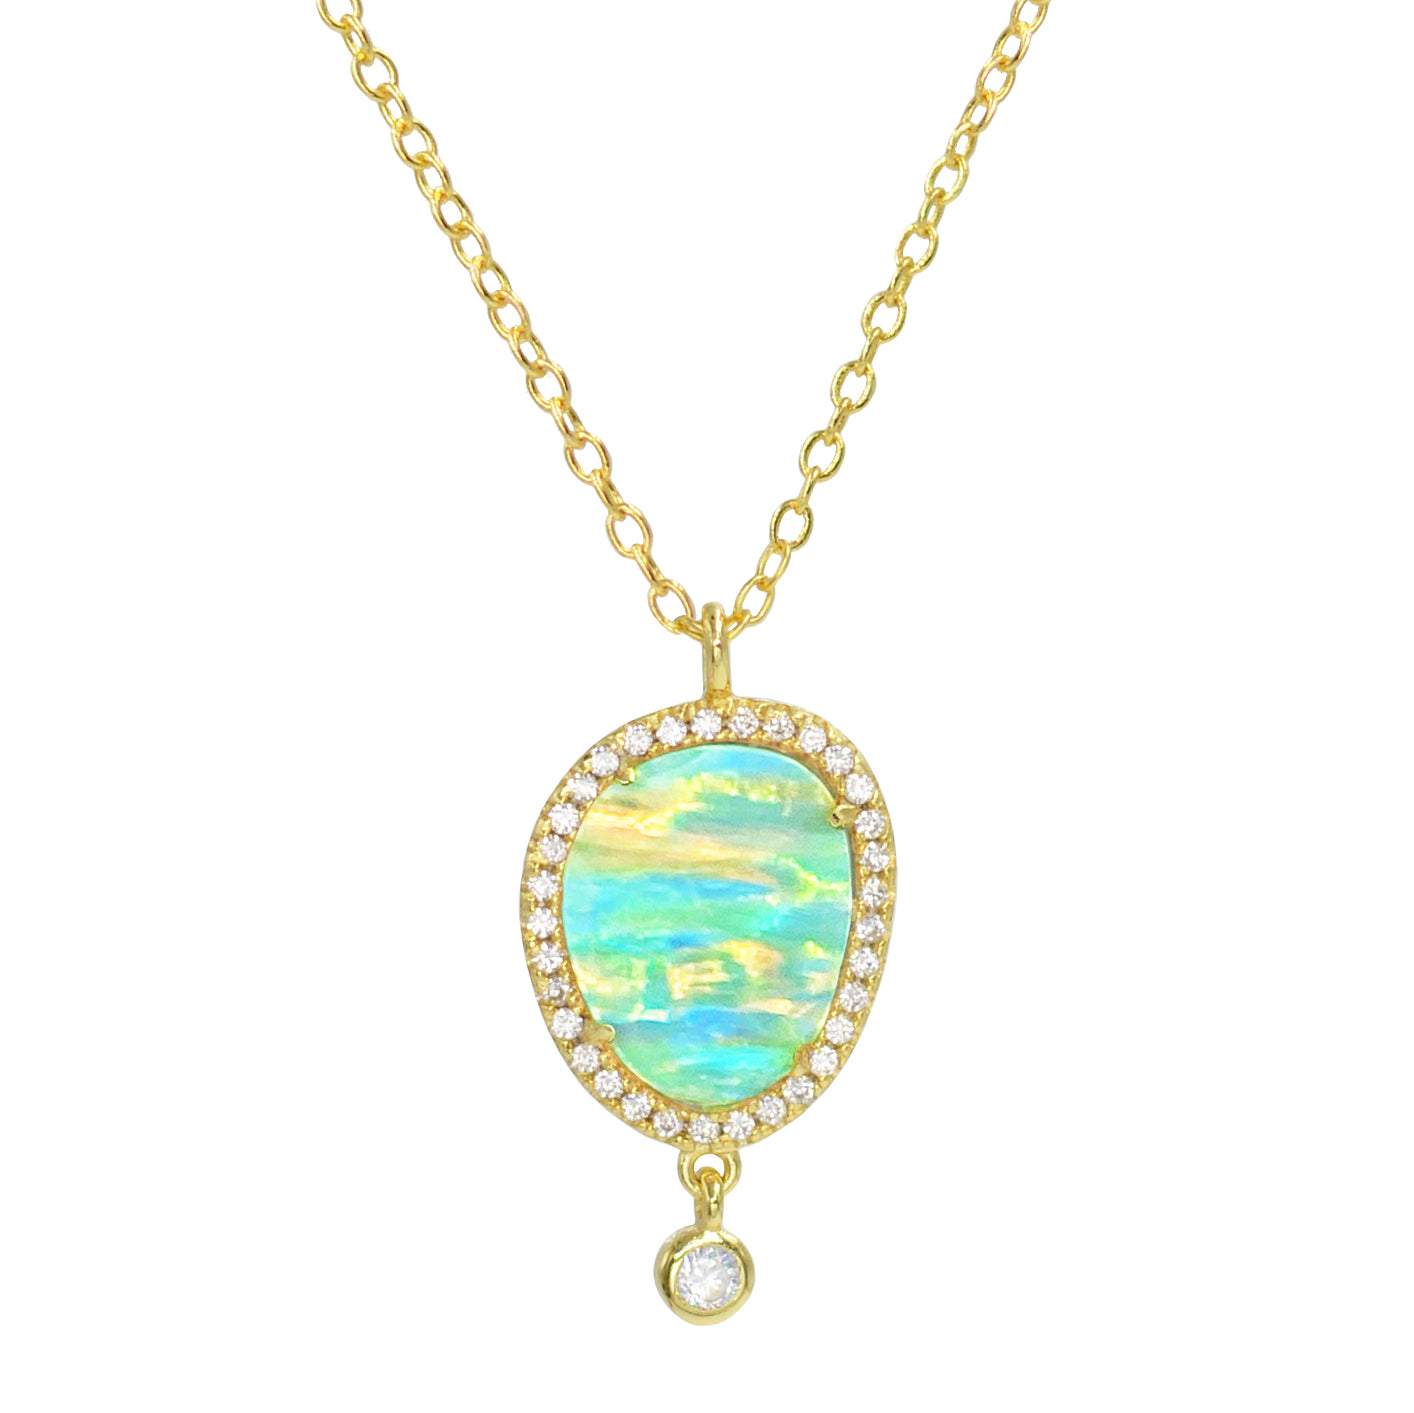 Johari Necklace with Green Opal Stripes Set in Sterling Silver with Gold Plating and Crystals